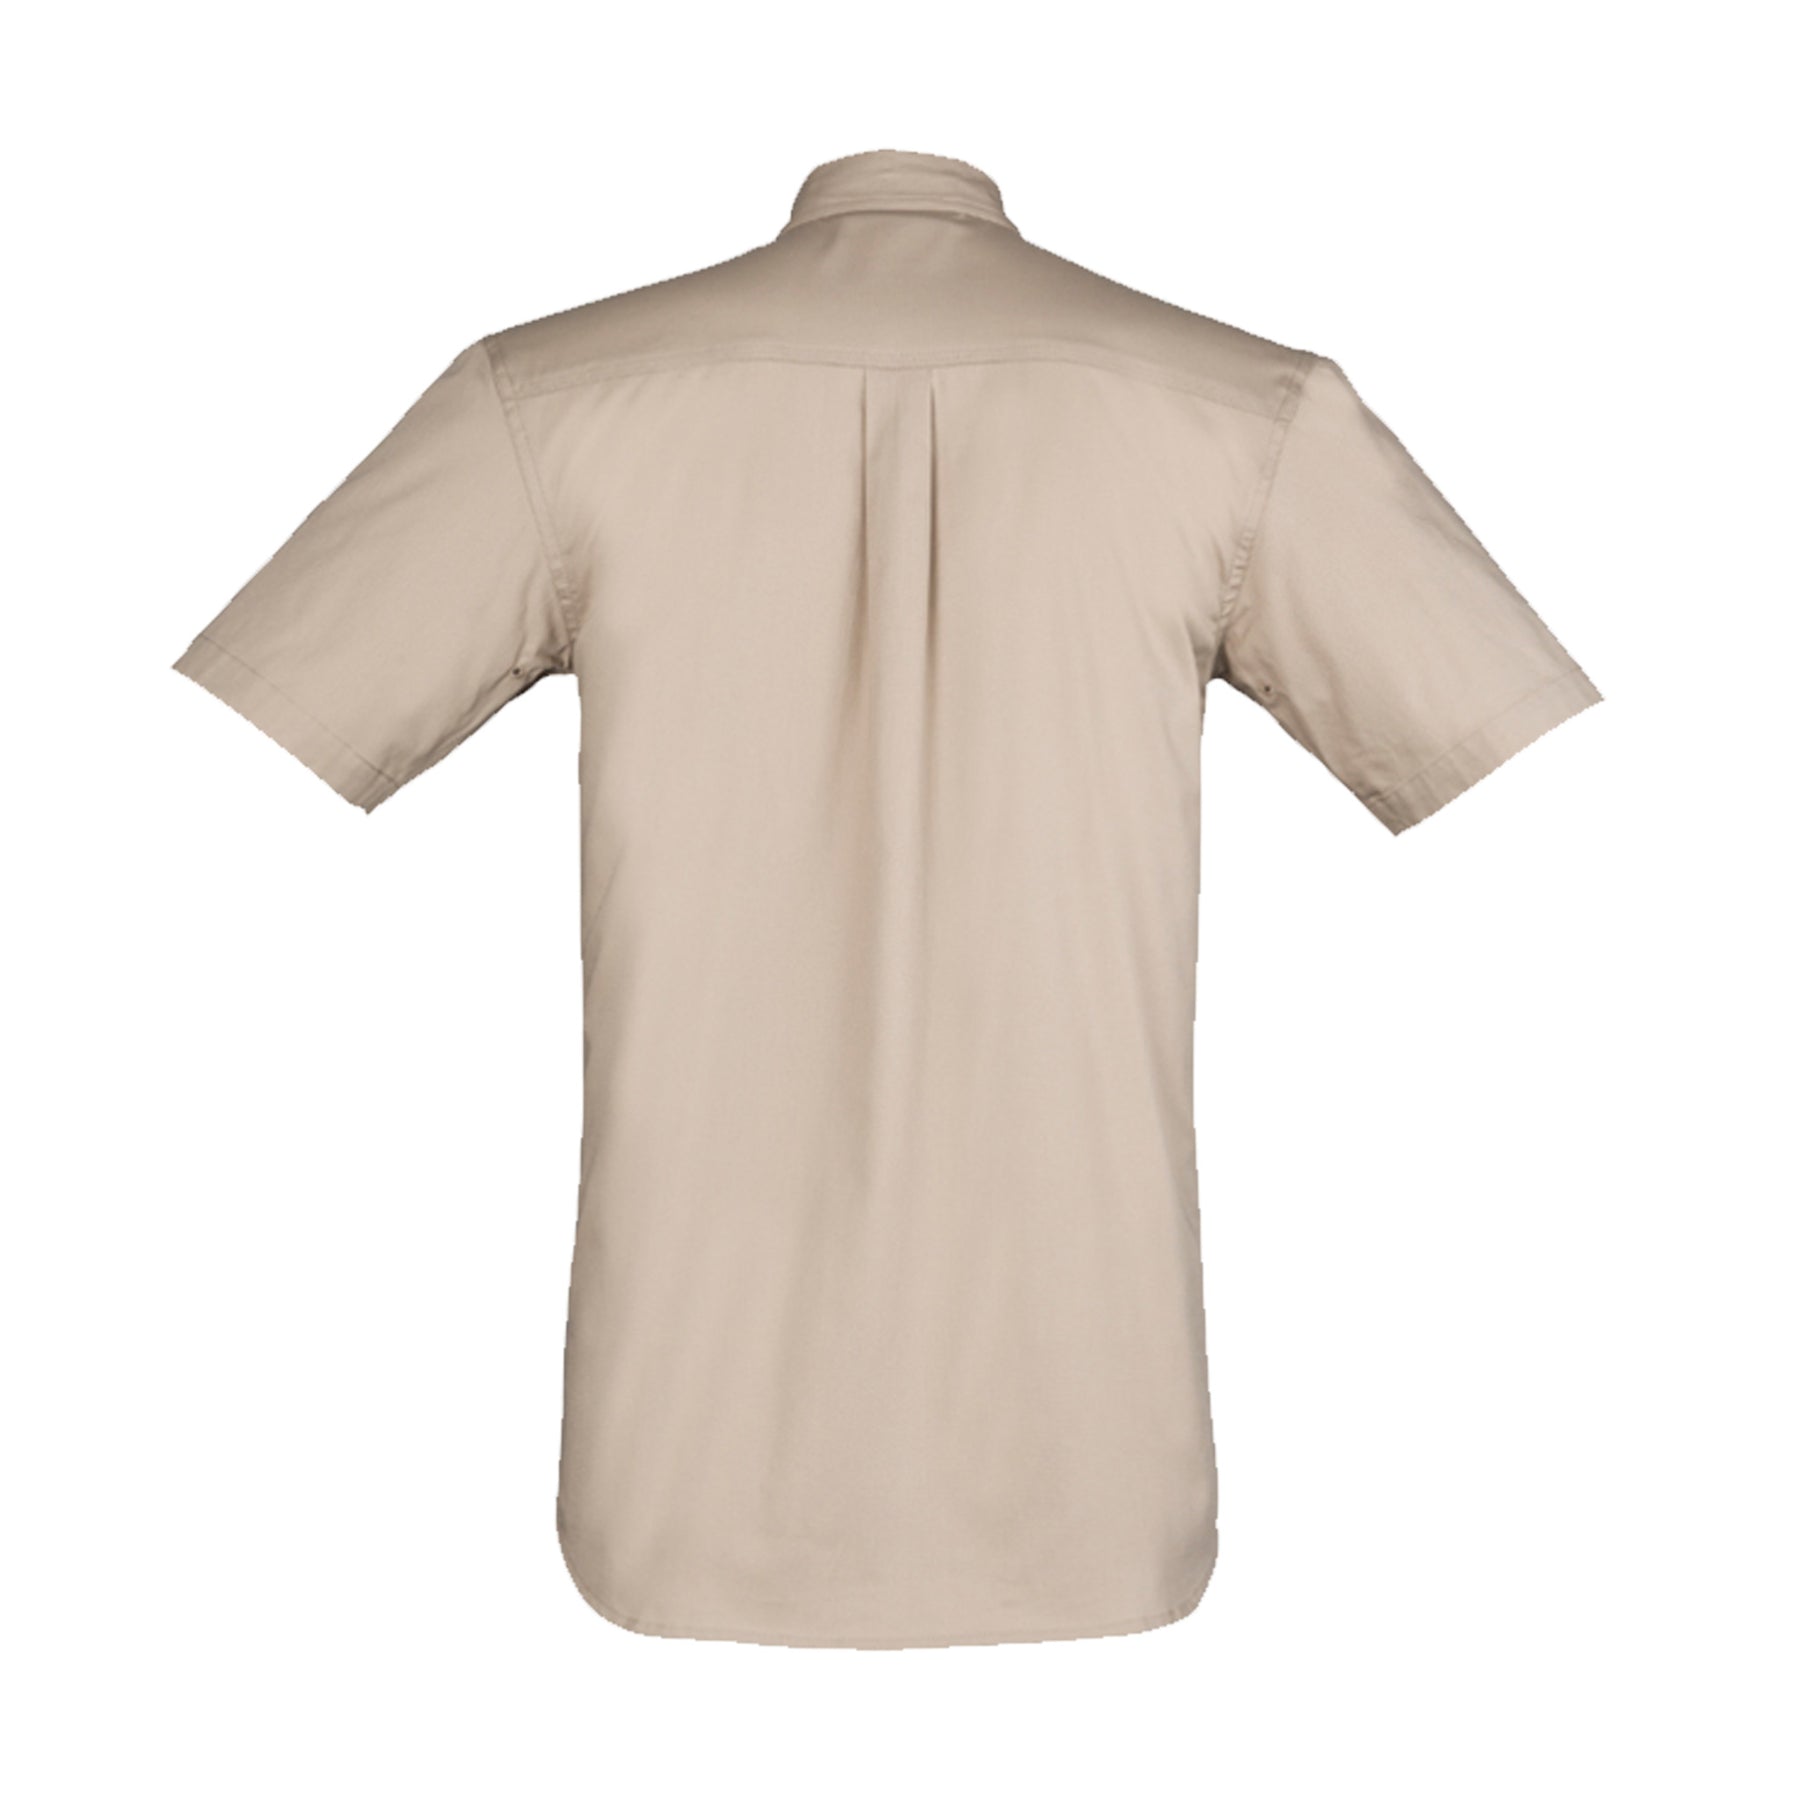 back of light weight short sleeve tradie shirt in sand